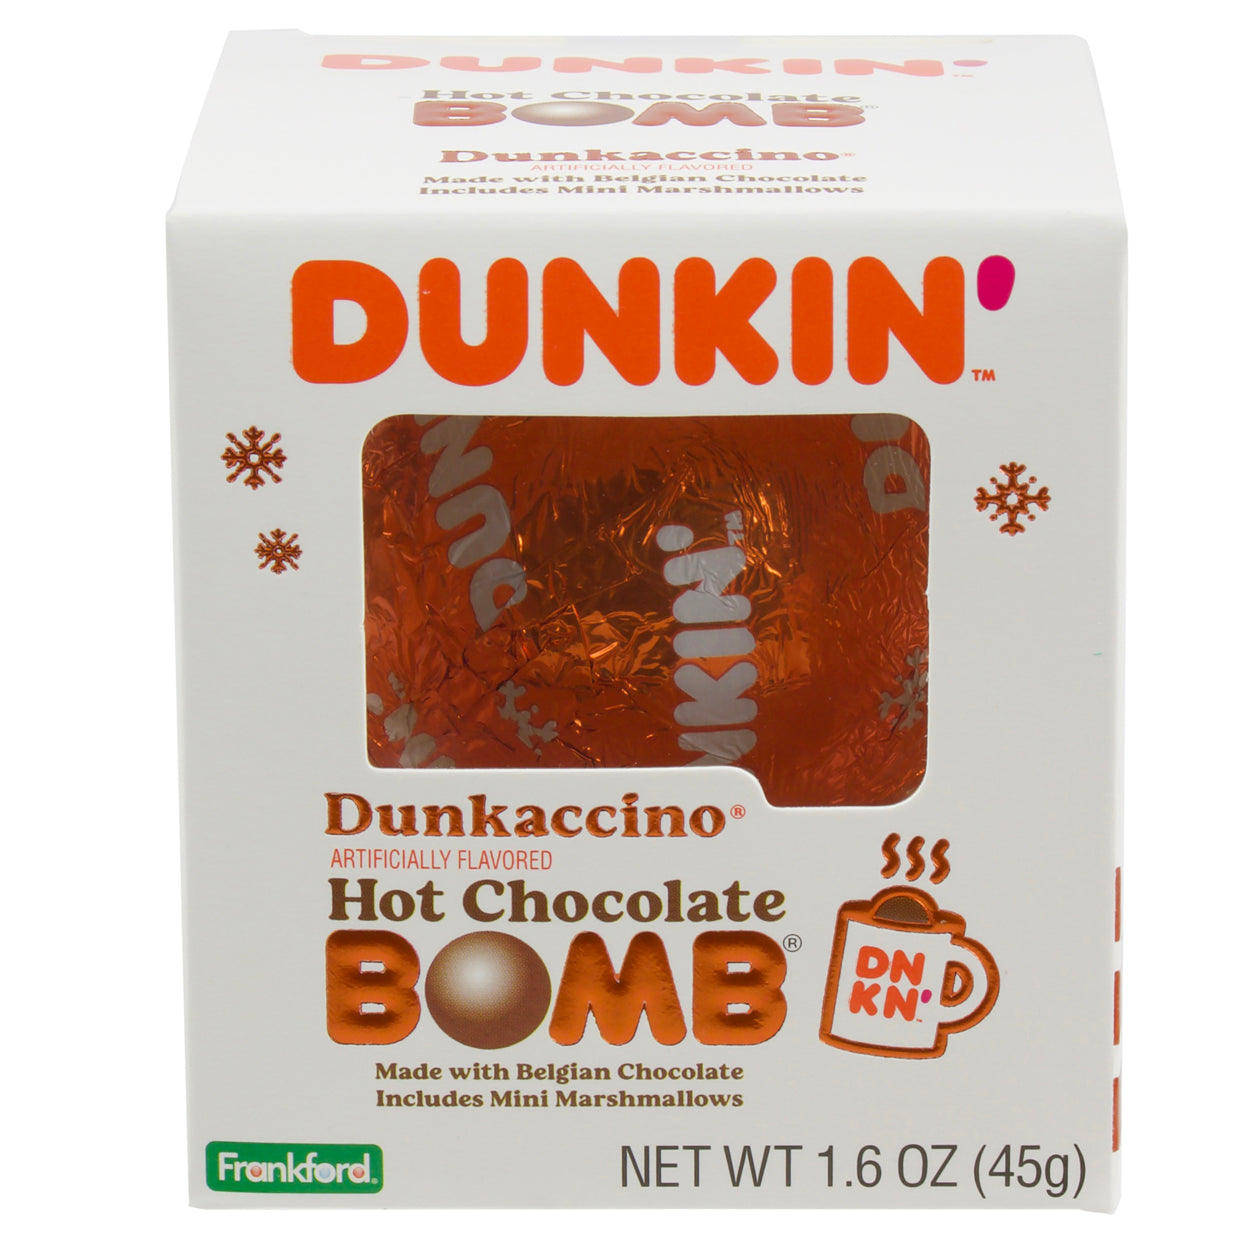 White Christmas themed box with 1 hot chocolate bomb wrapped in orange foil with Dunkin' logo